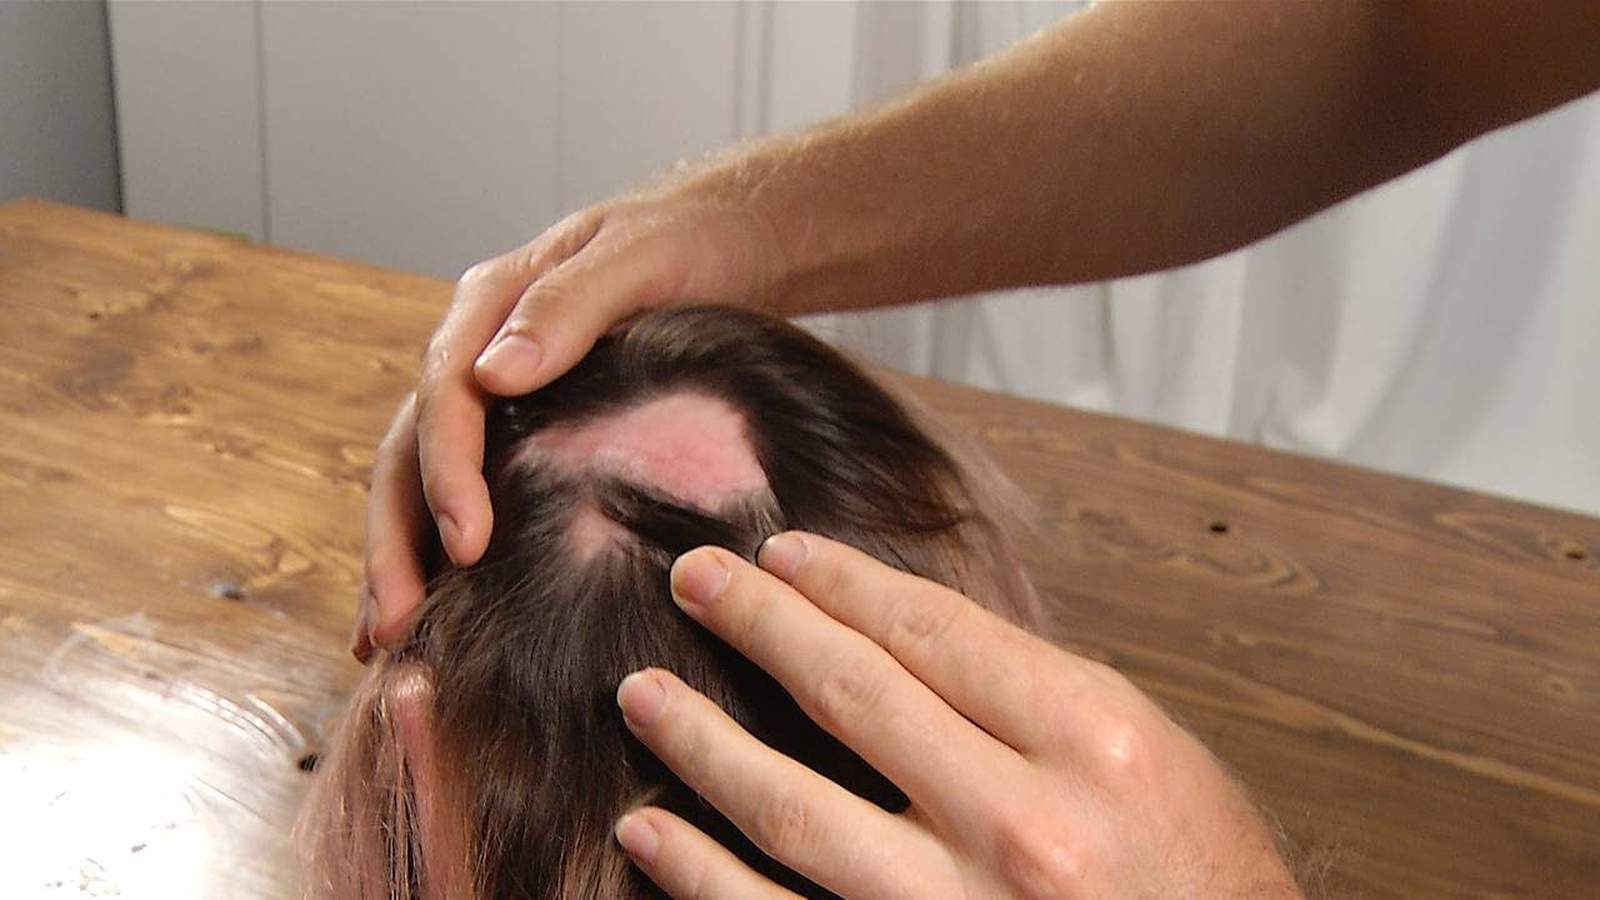 Woman Warns Of Salon Dangers After Sustaining Chemical Burns